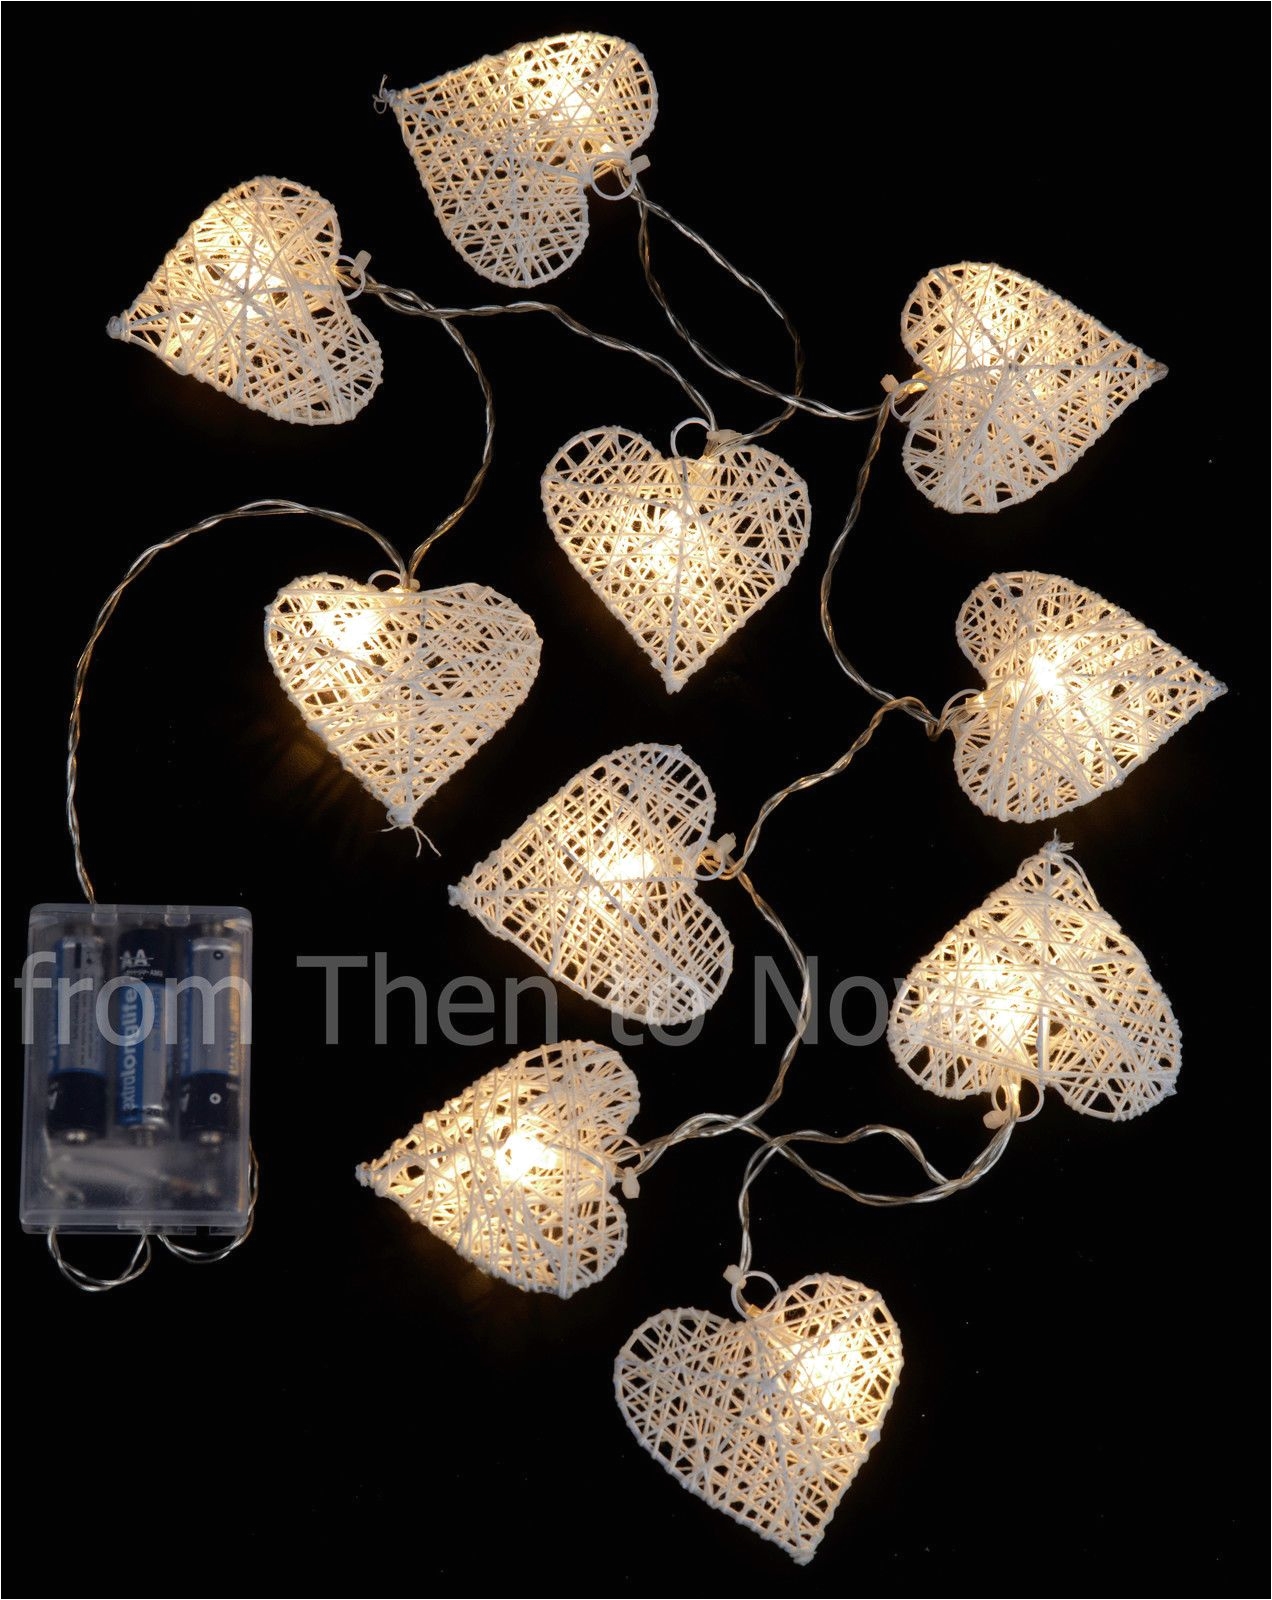 Lighted Paper Lanterns 10 White Heart Garland String Led Lights Battery Operated Wedding